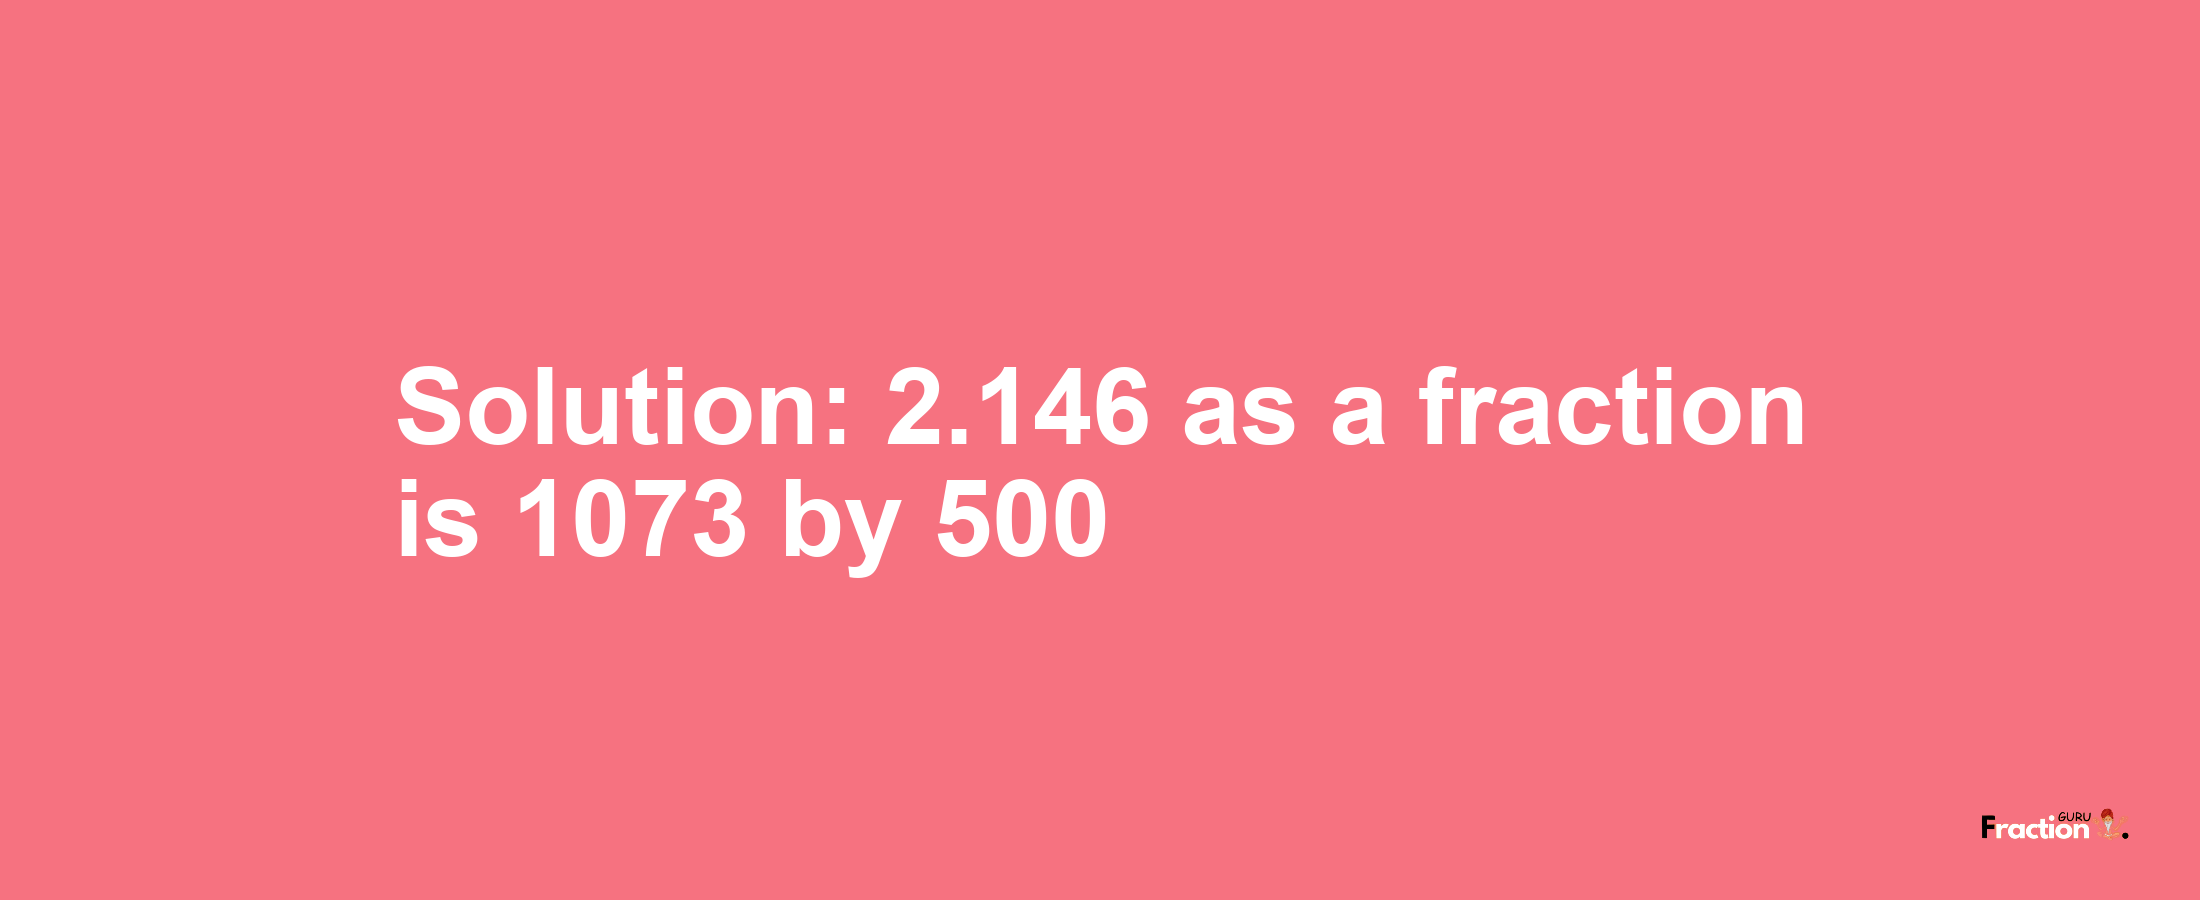 Solution:2.146 as a fraction is 1073/500